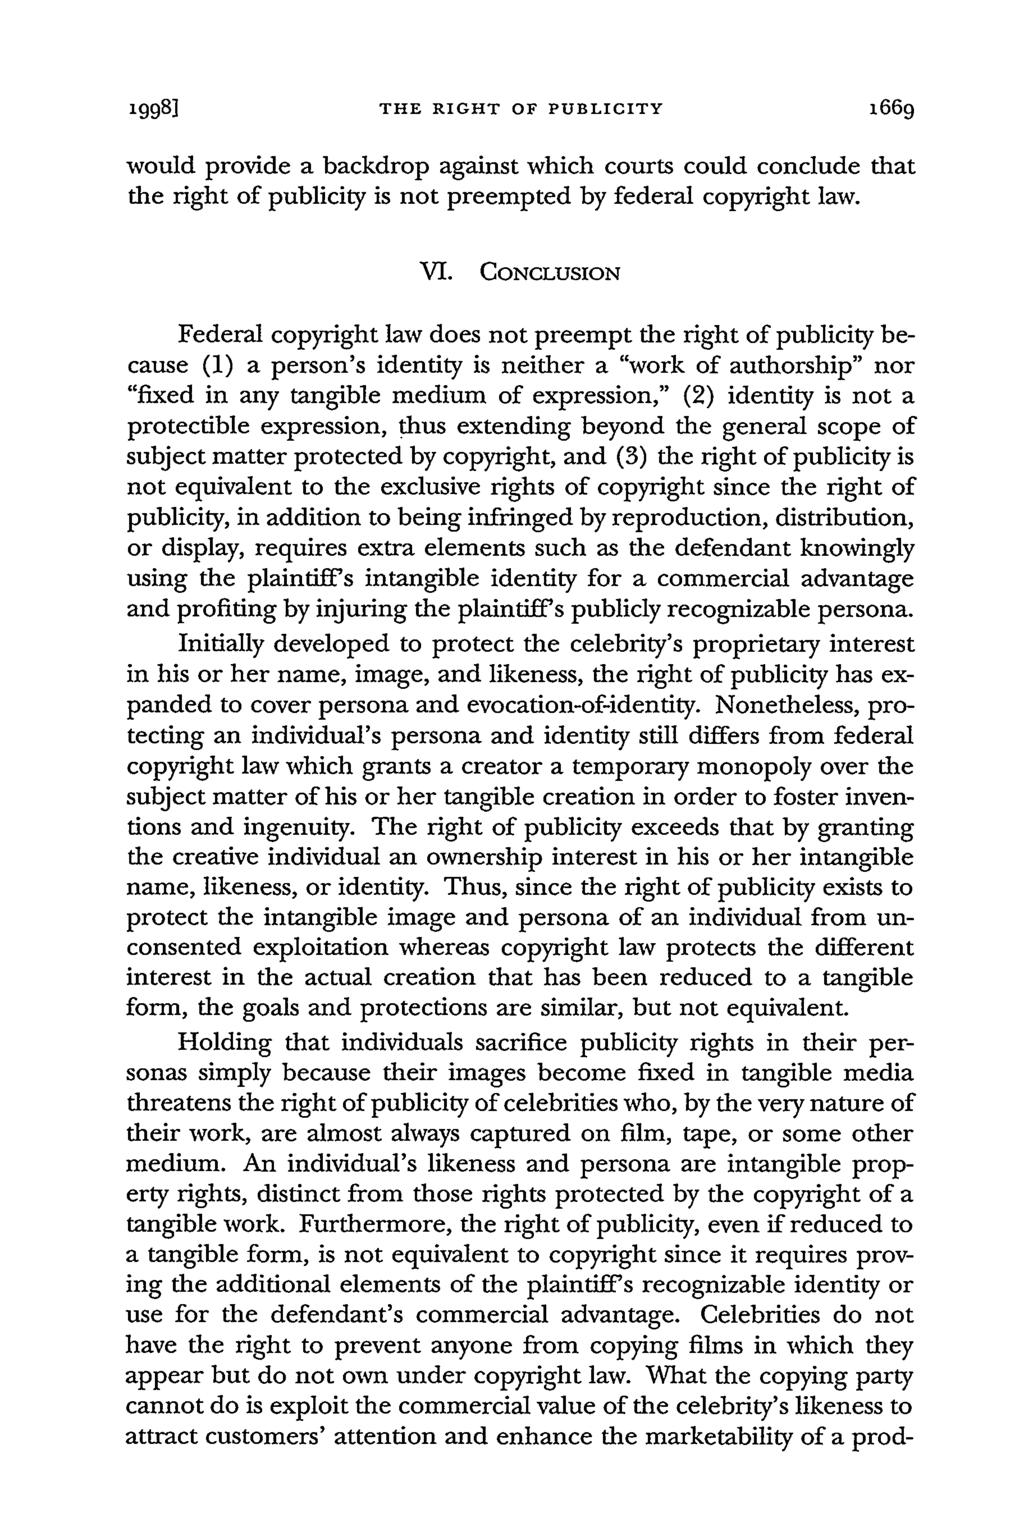 1998] THE RIGHT OF PUBLICITY 1669 would provide a backdrop against which courts could conclude that the right of publicity is not preempted by federal copyright law. VI.